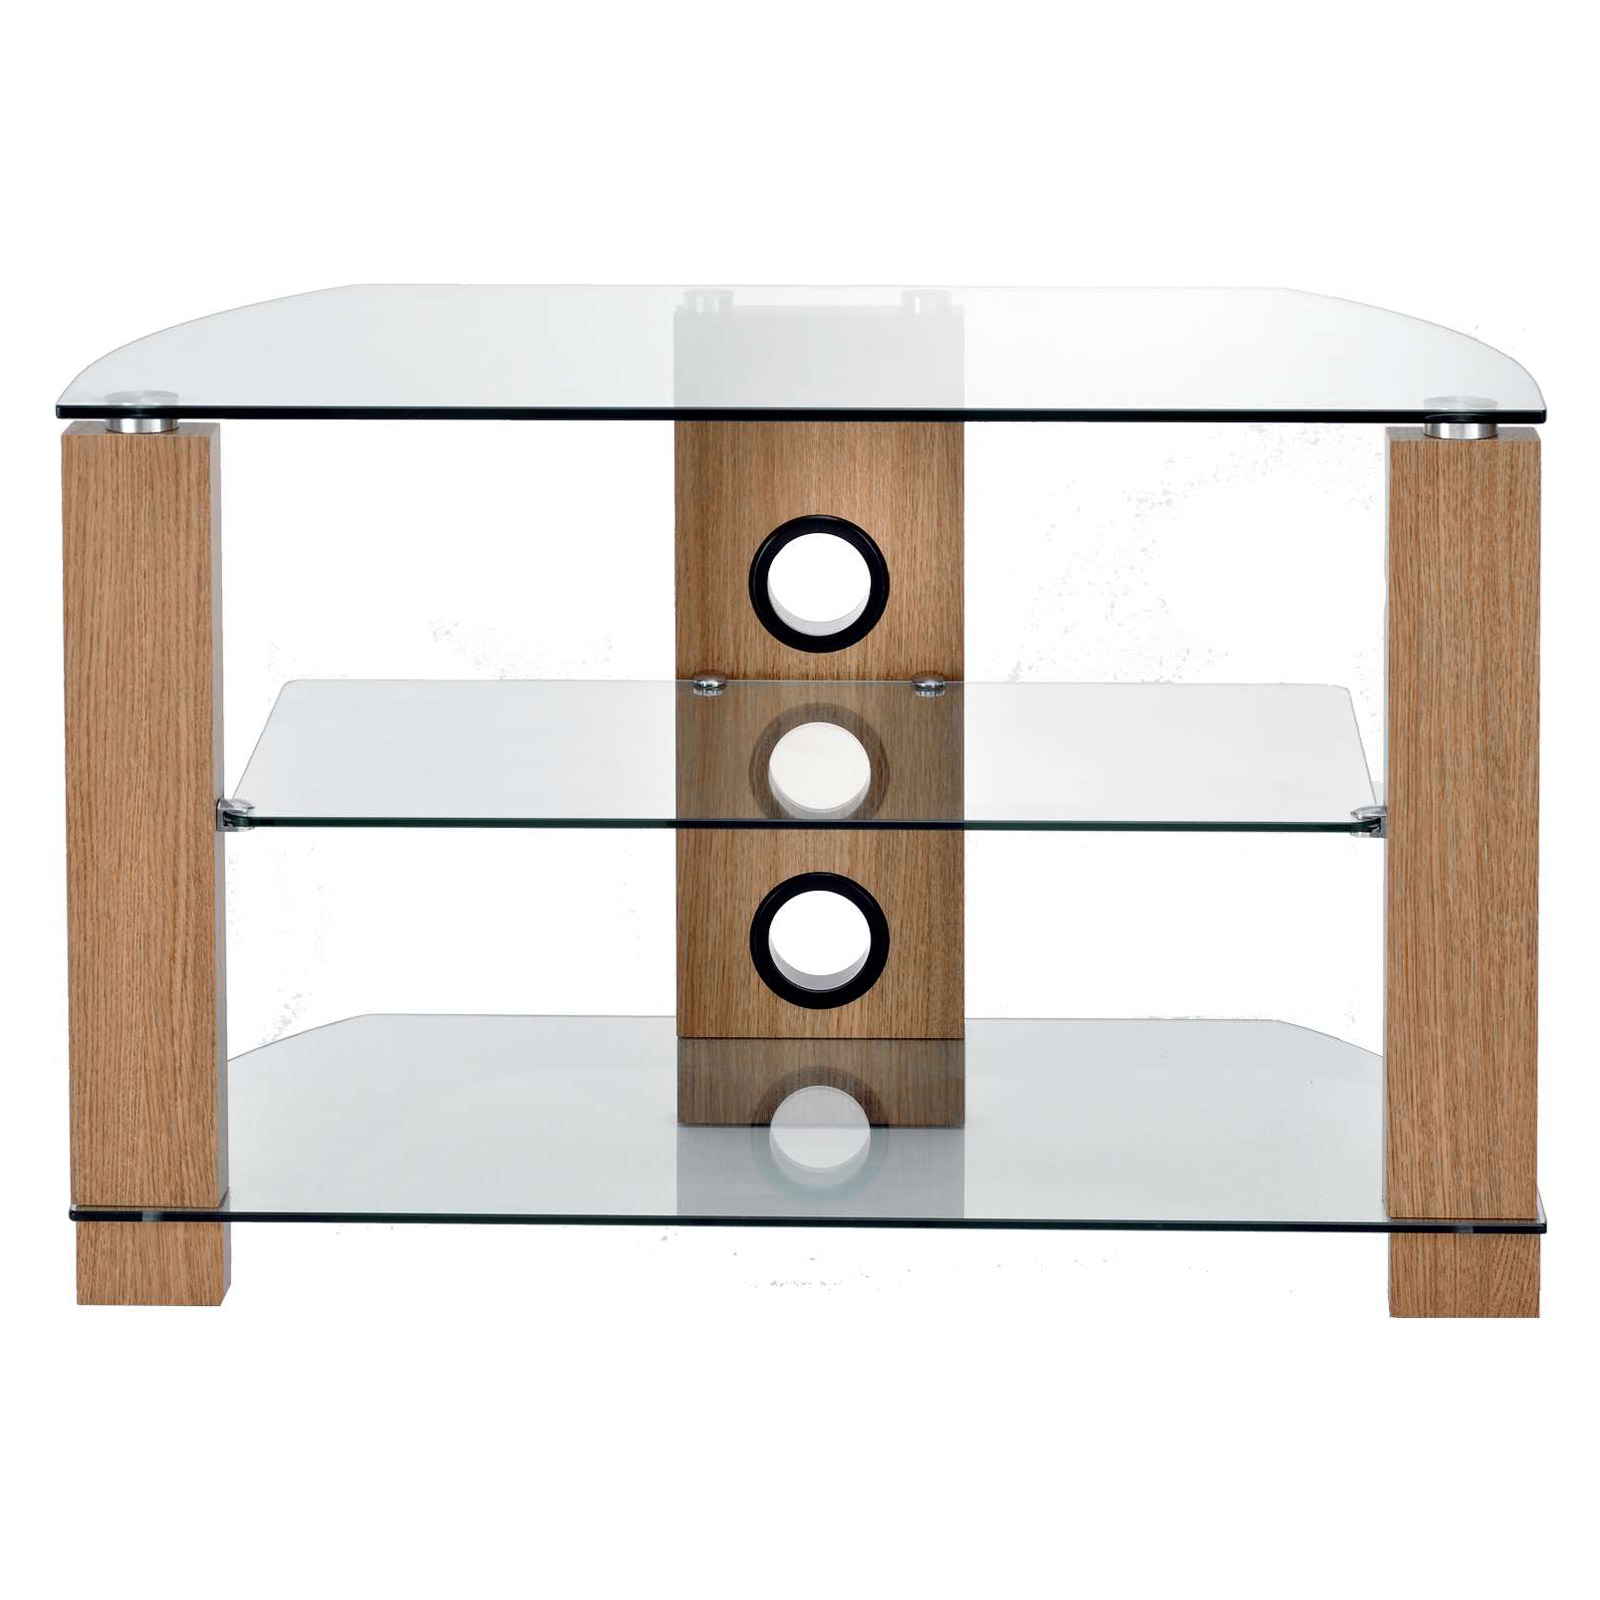 Photos - Mount/Stand TTAP L630 1200 2O Vision 1200mm TV Stand in Light Oak with Clear Glass L63 